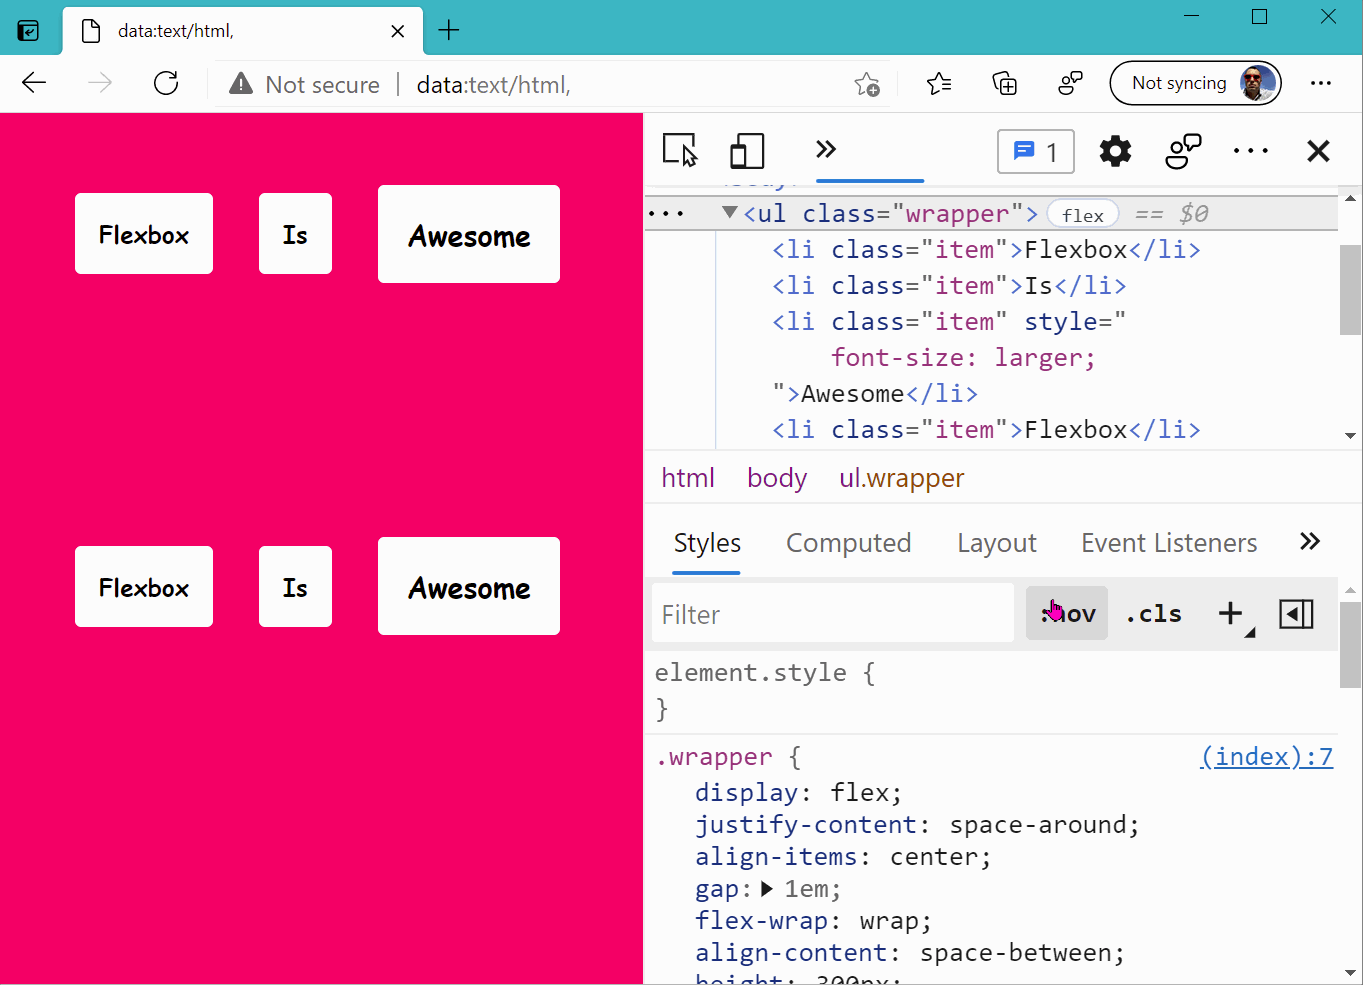 Another gif animation showing the effect of hovering over properties in the Styles pane